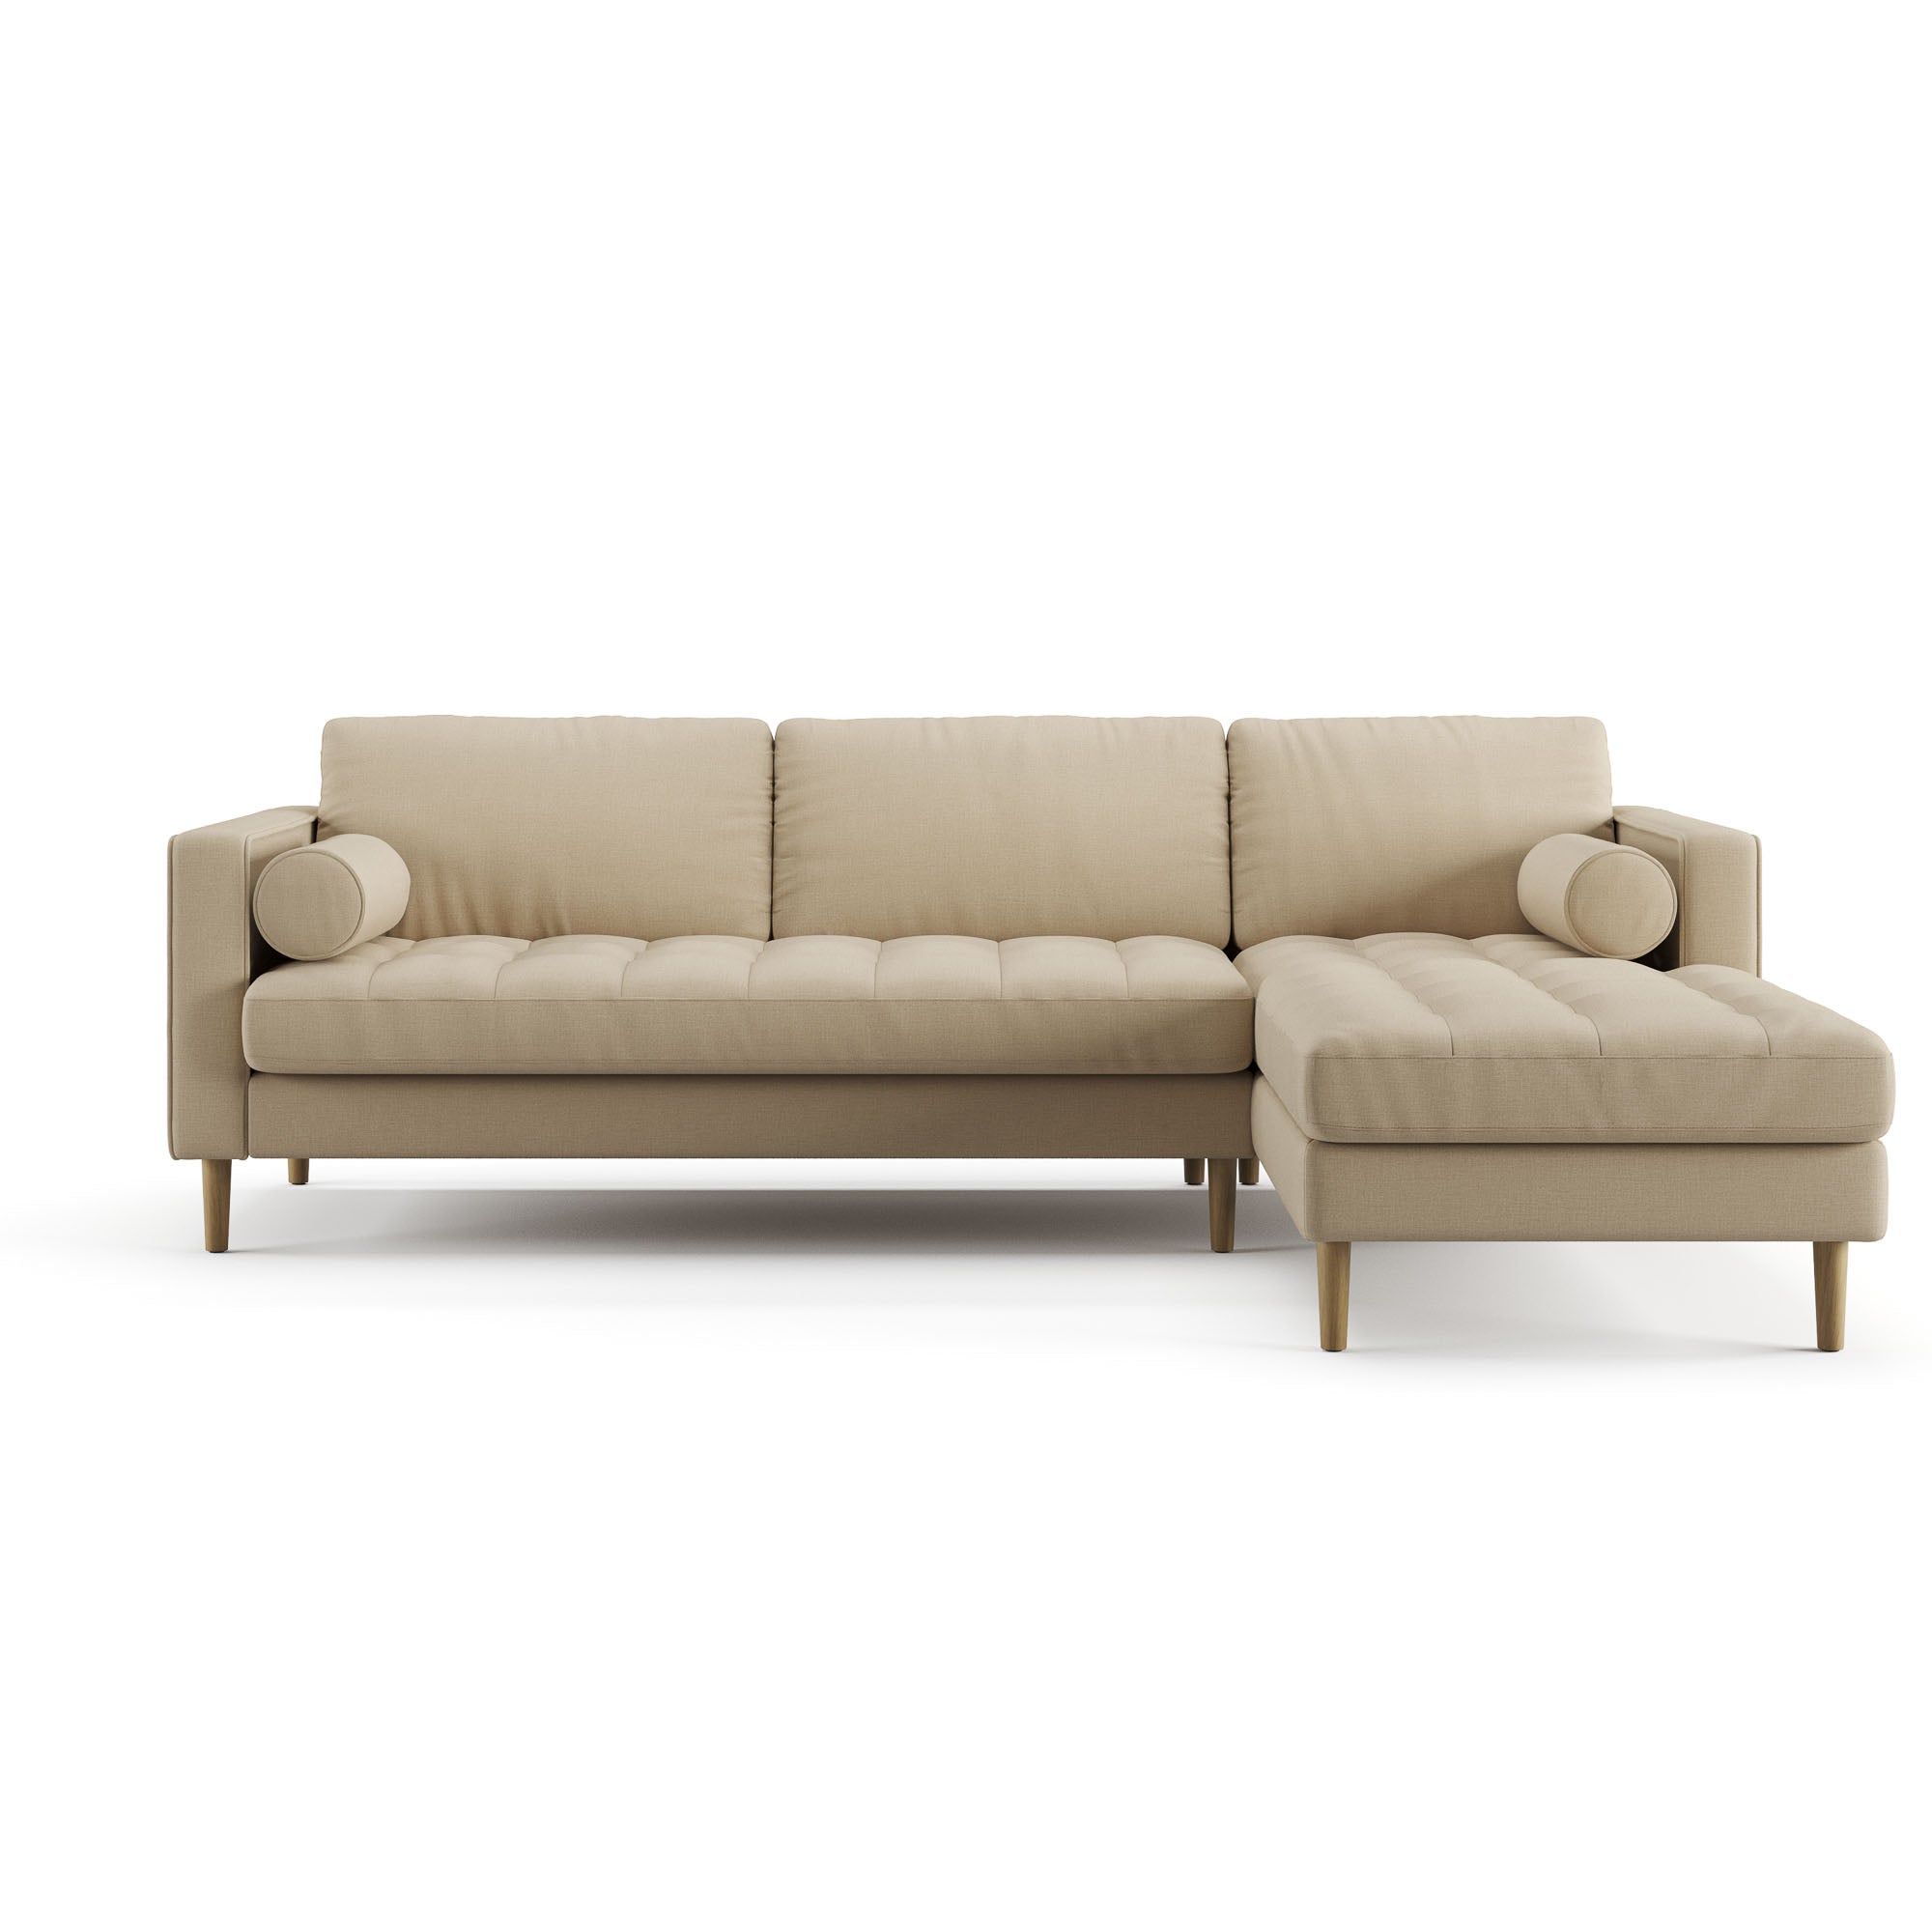 abalone-grey left-sectional